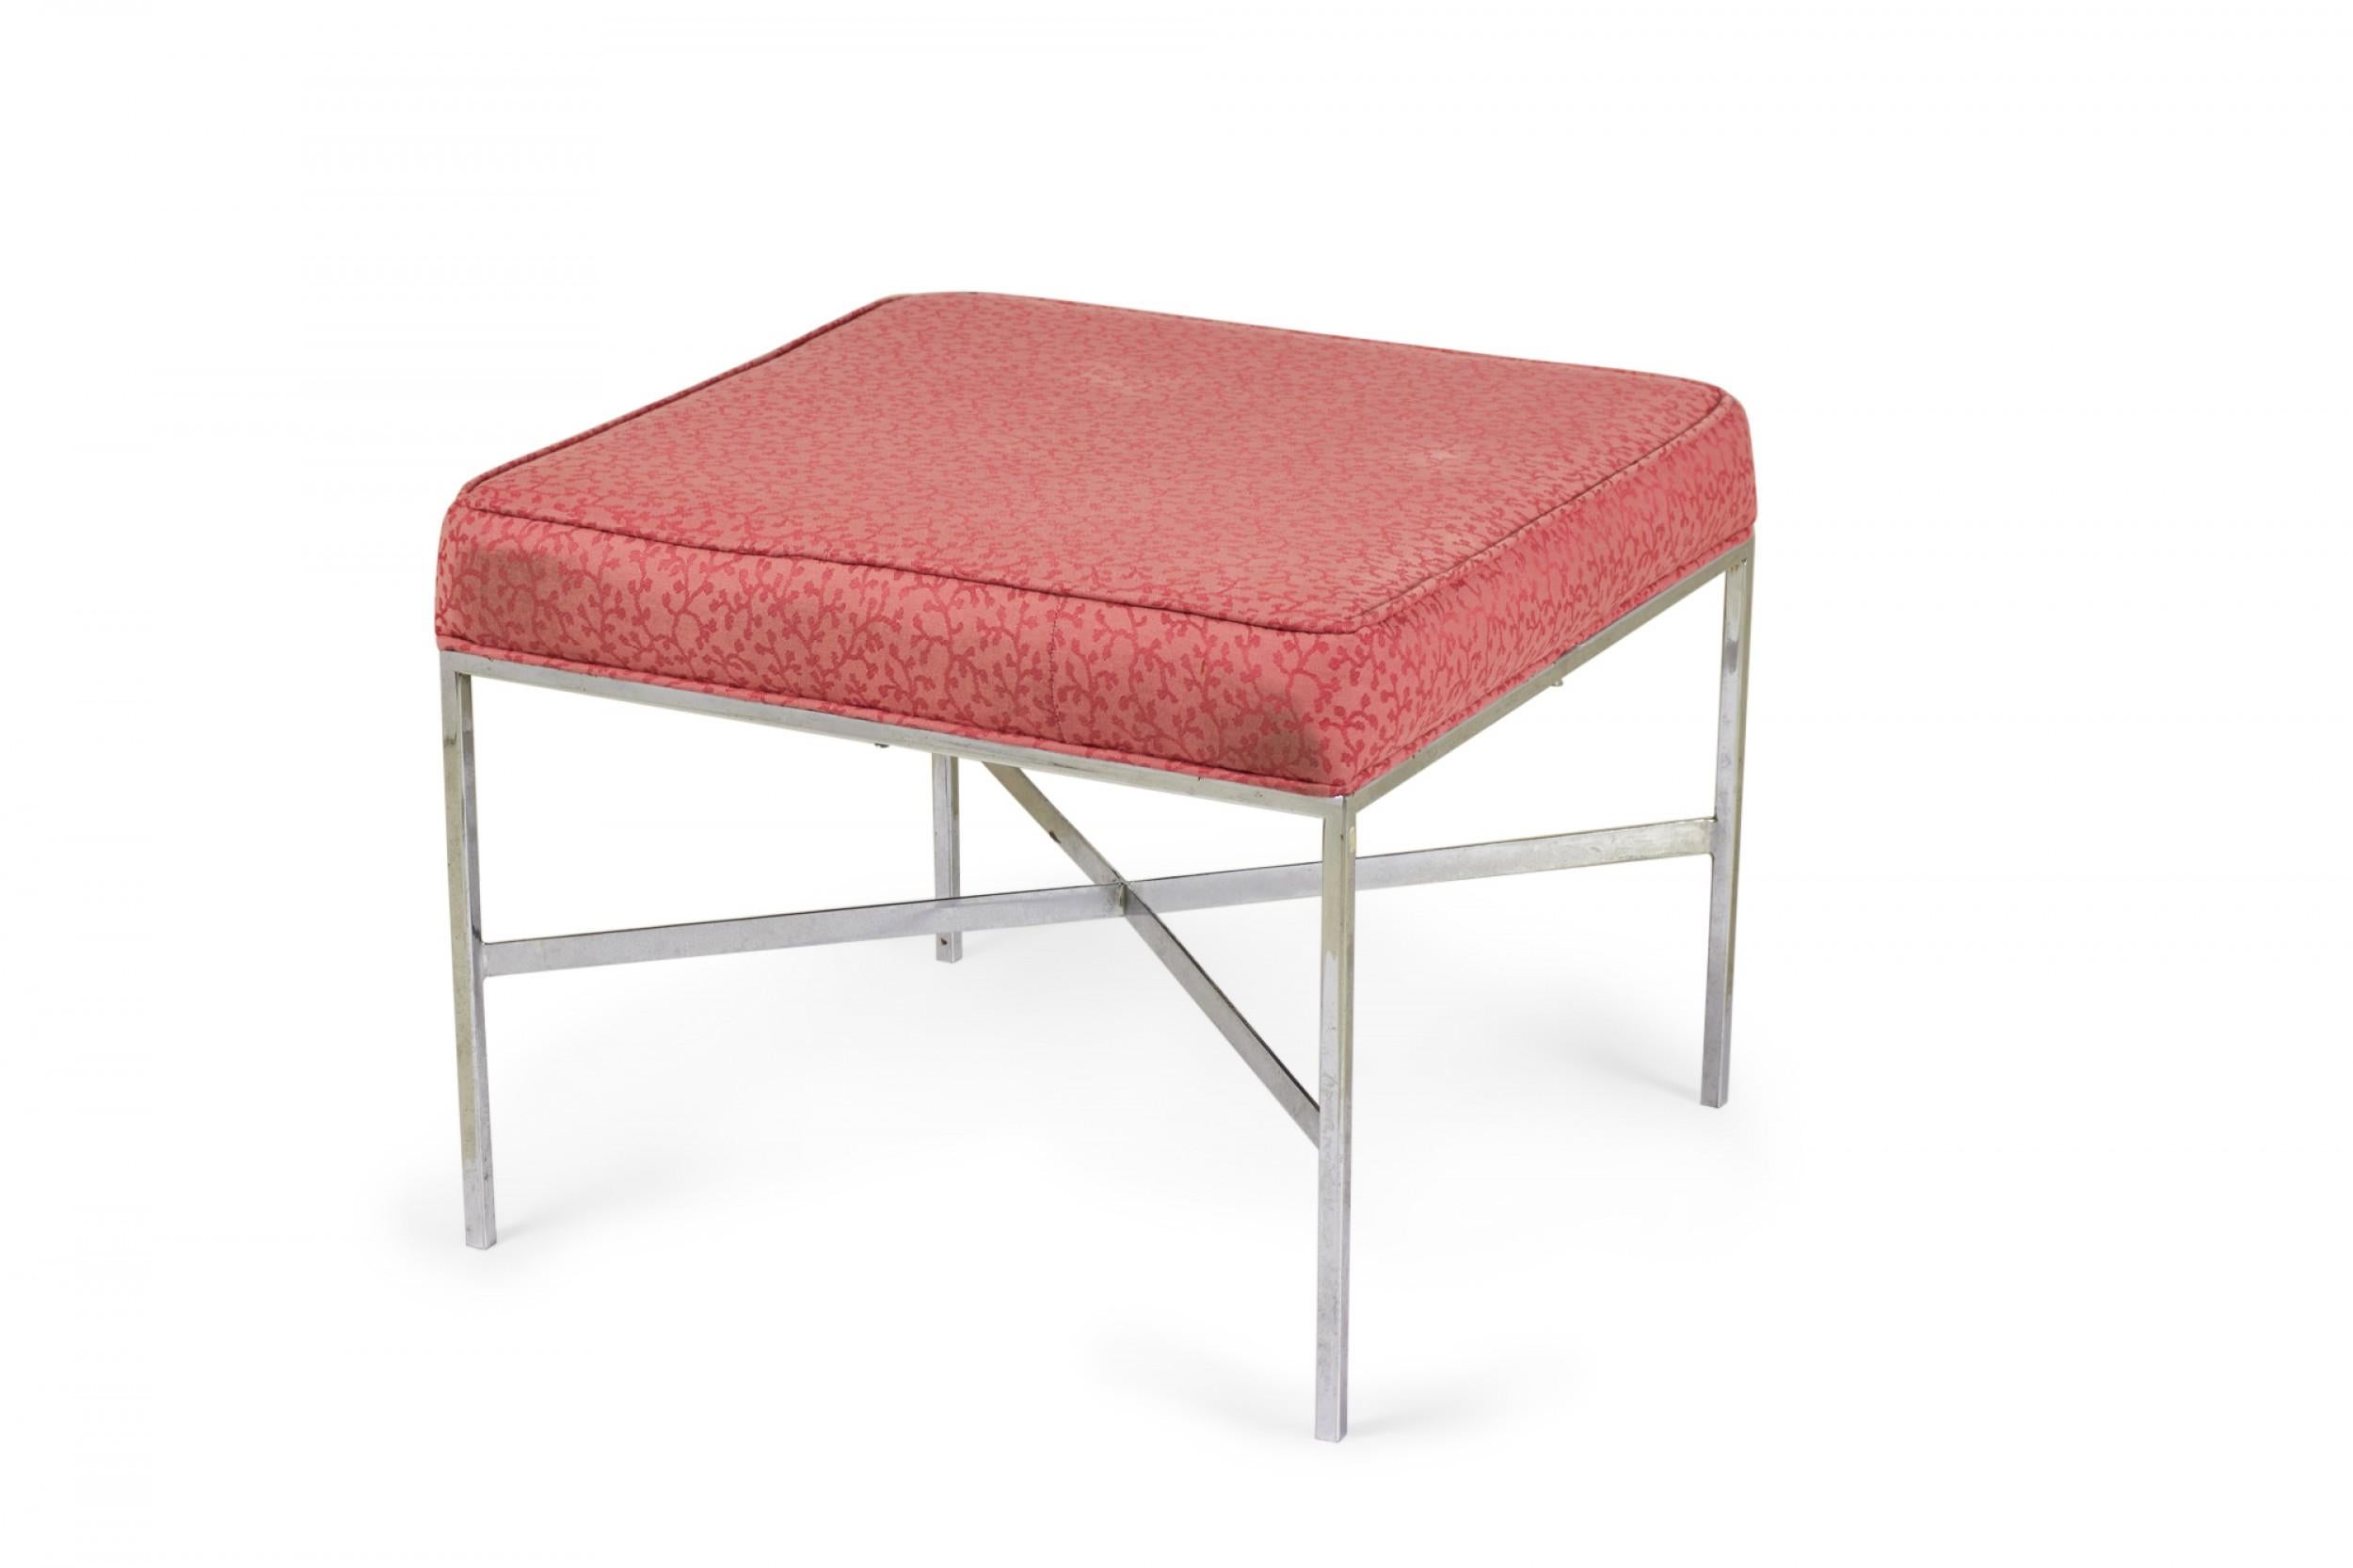 American Modernist square bench with a thin chrome frame and x-shaped stretcher and a patterned raspberry pink upholstered seat. (DESIGN INSTITUTE OF AMERICA)